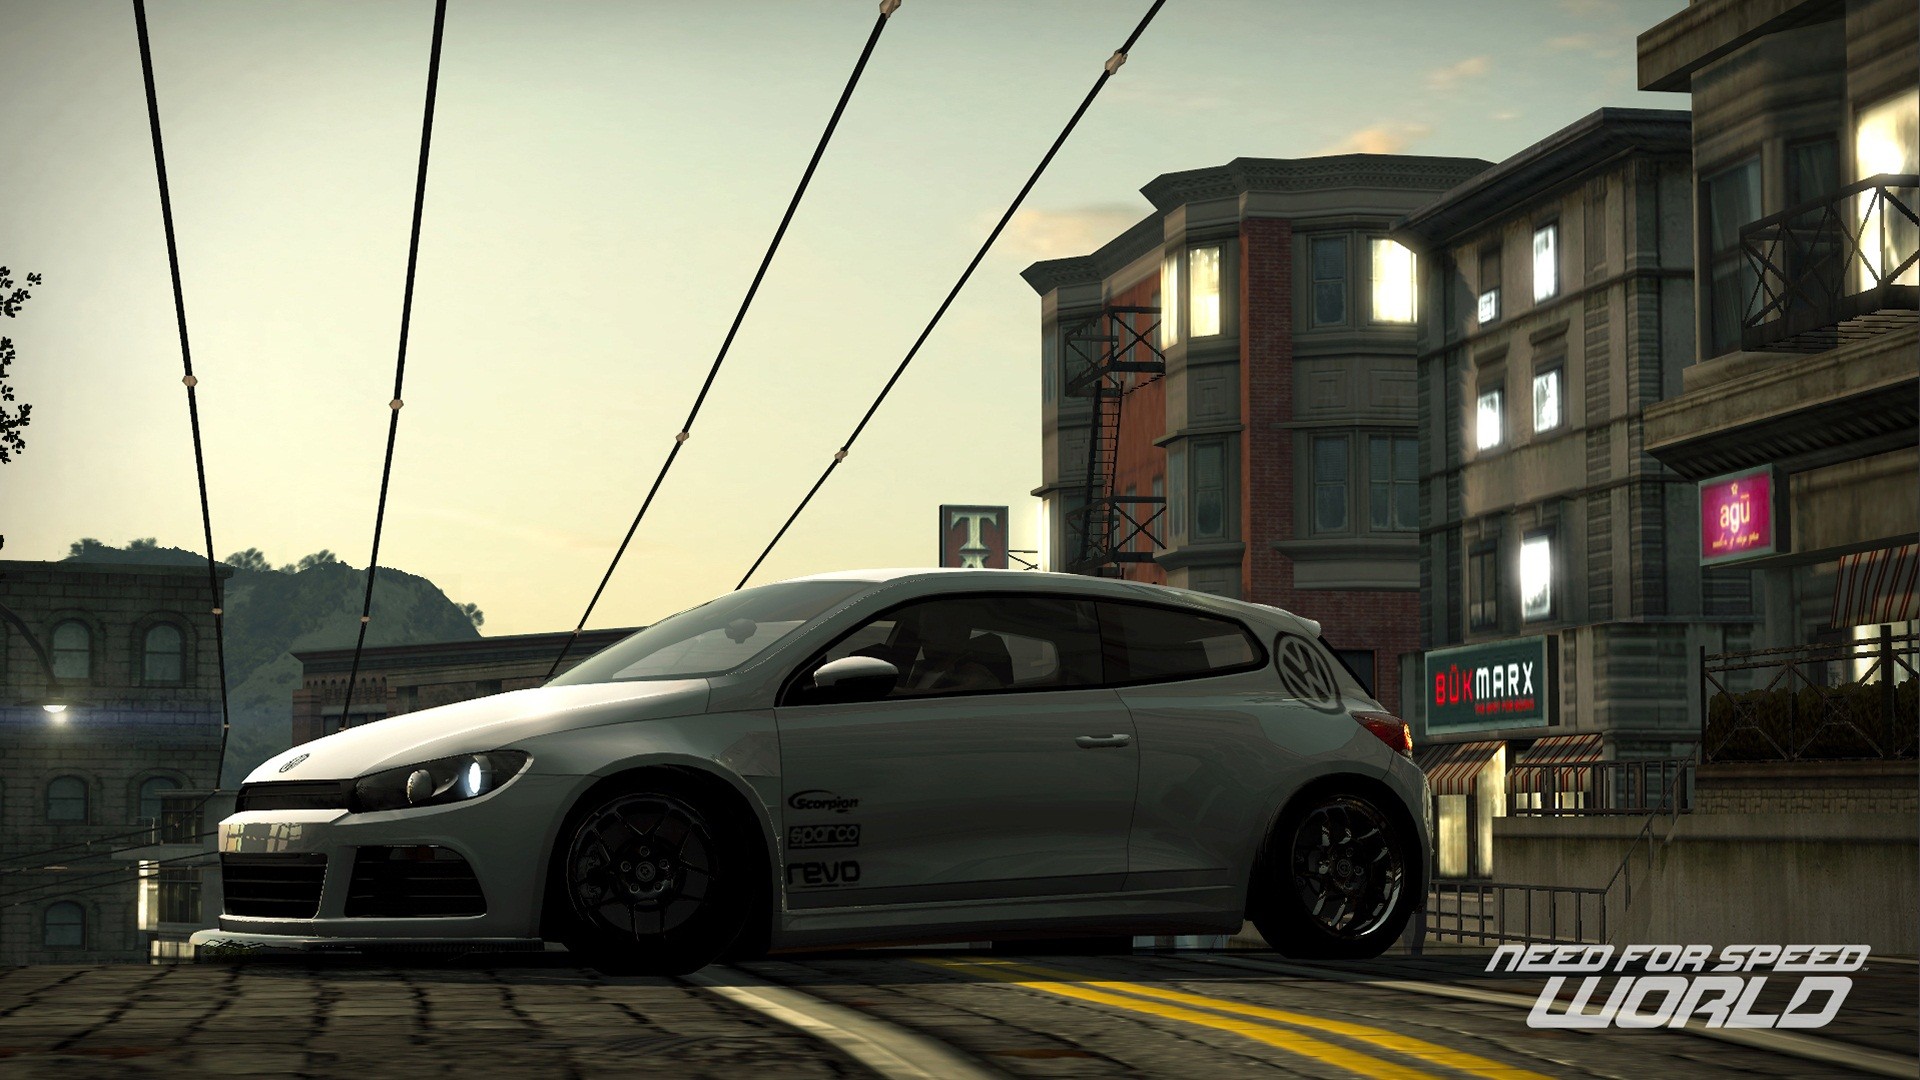 video, Games, Cars, Scirocco, Volkswagen, Scirocco, Need, For, Speed, World, Games, Pc, Games Wallpaper